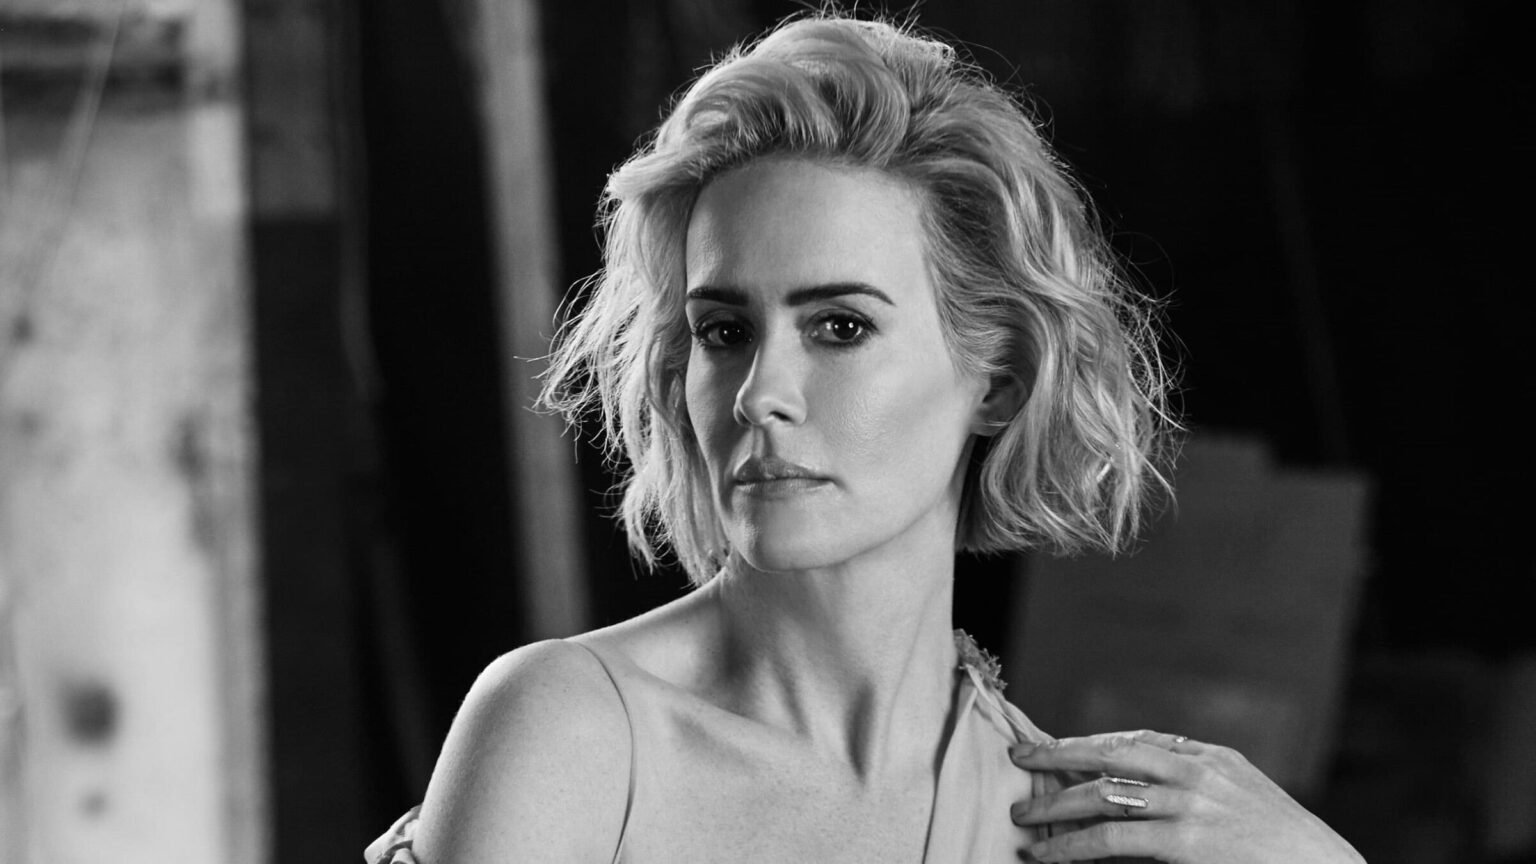 She is one of the most recognizable actresses in the world today. Check out our list of some of the most unforgettable movies with Sarah Paulson.